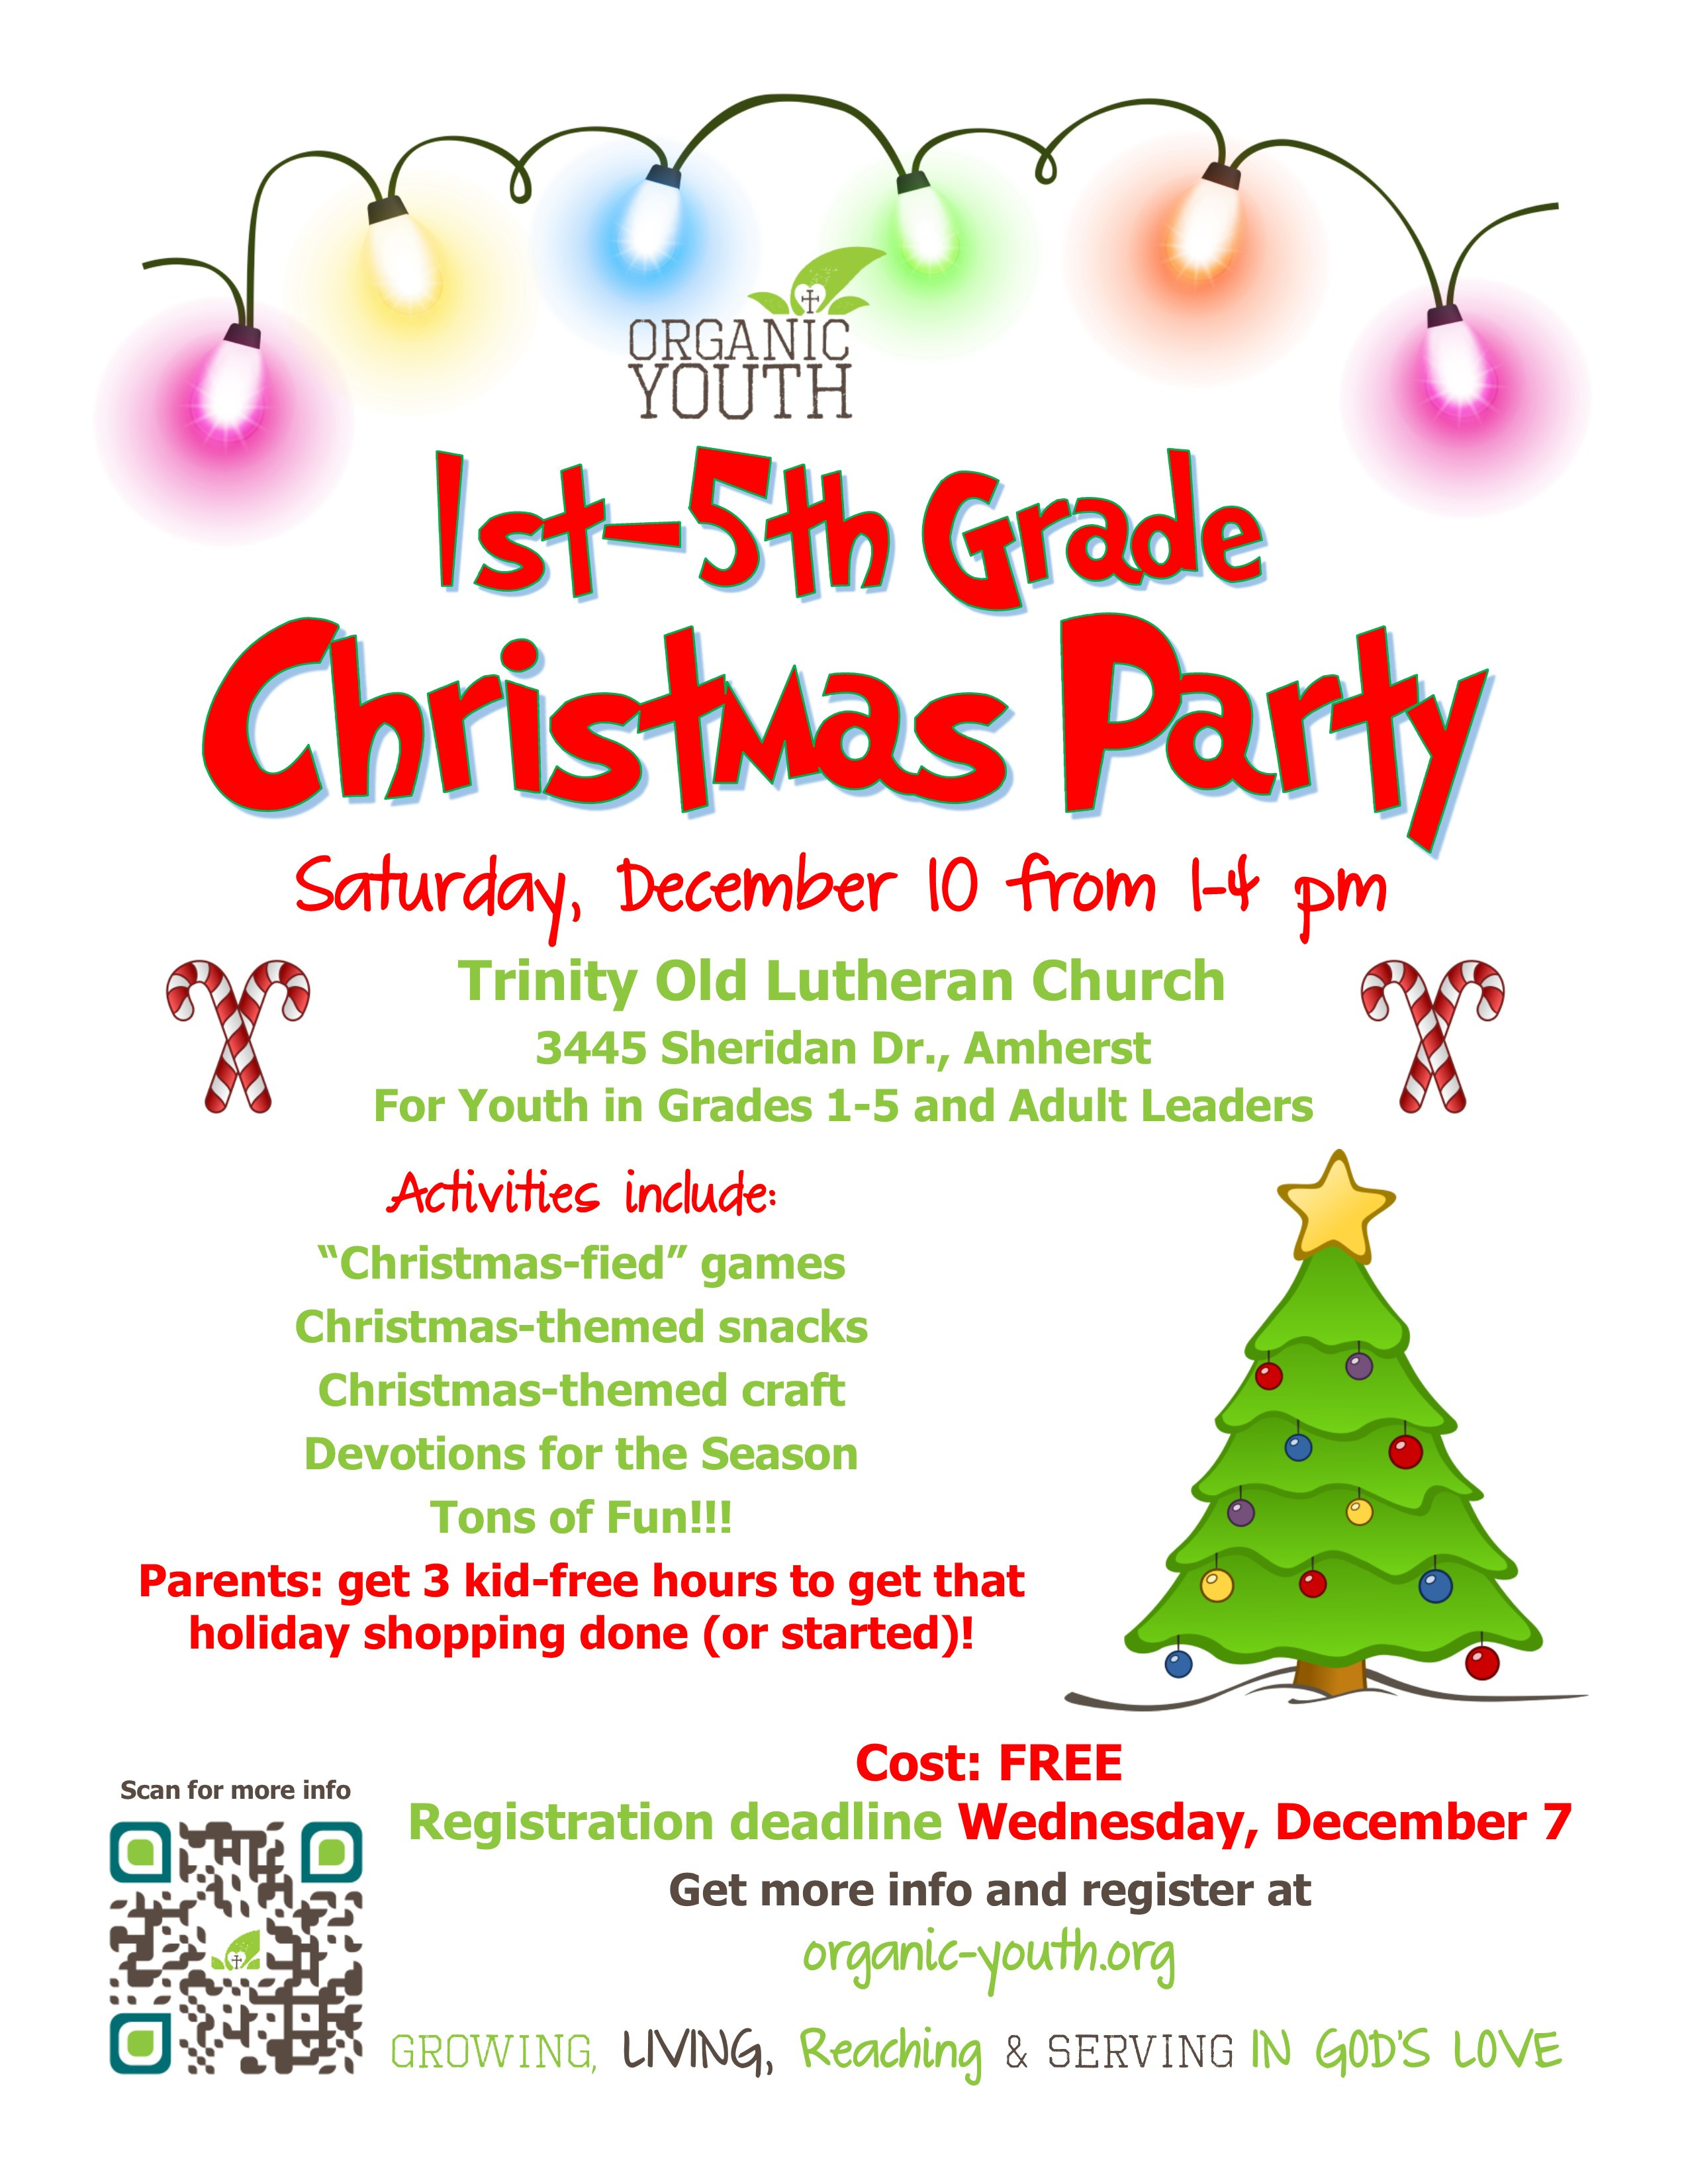 5Th Grade Holiday Party Ideas
 1st 5th Grade Christmas Party – Organic Youth